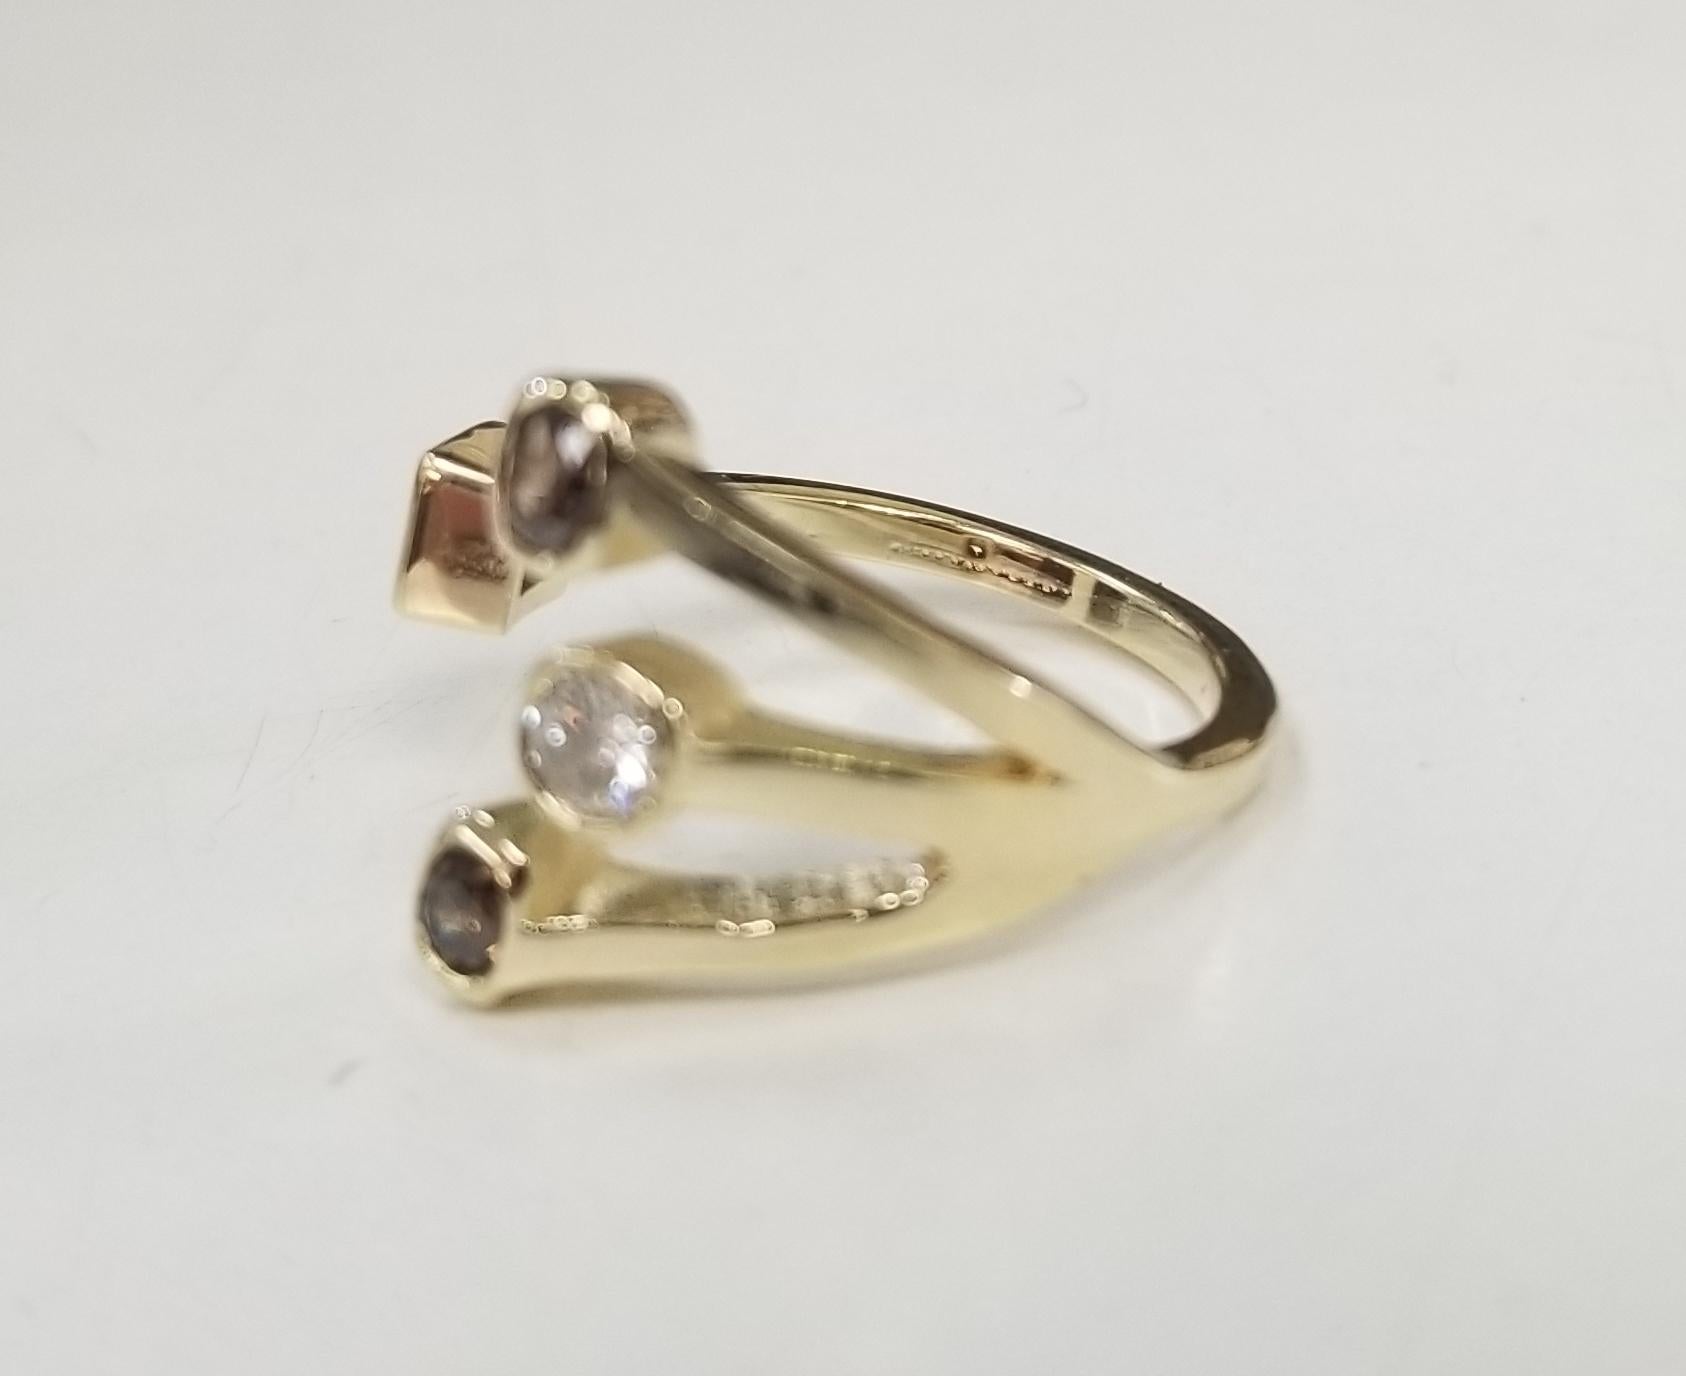 14K yellow gold White and Brown Diamonds split ring
Specifications:
    MAIN stone:    4 White and Brown Diamonds .70cts.  
    metal: 14K Yellow GOLD
    type: RING
    weight: 3.6 GRS 
    size: 6.5US
*Pick your stones and shape*